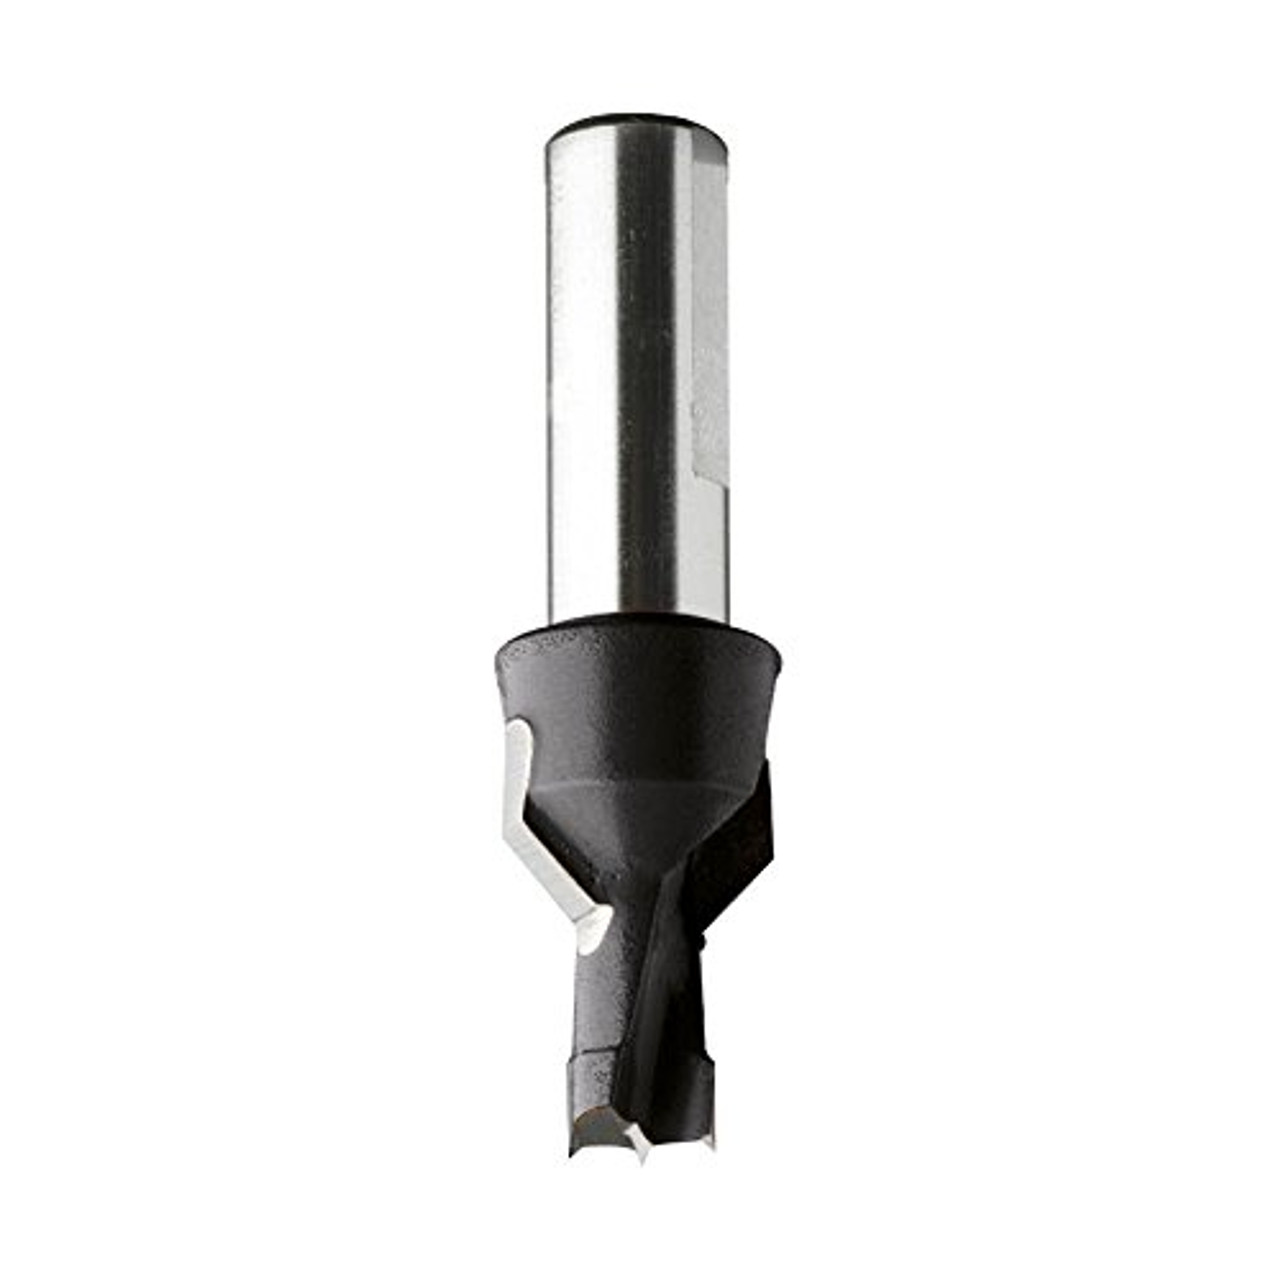 CMT 376.100.11 Dowel Drill with Countersink, 10mm (25/64-Inch) Diameter, 10mm Shank, Right-Hand Rotation